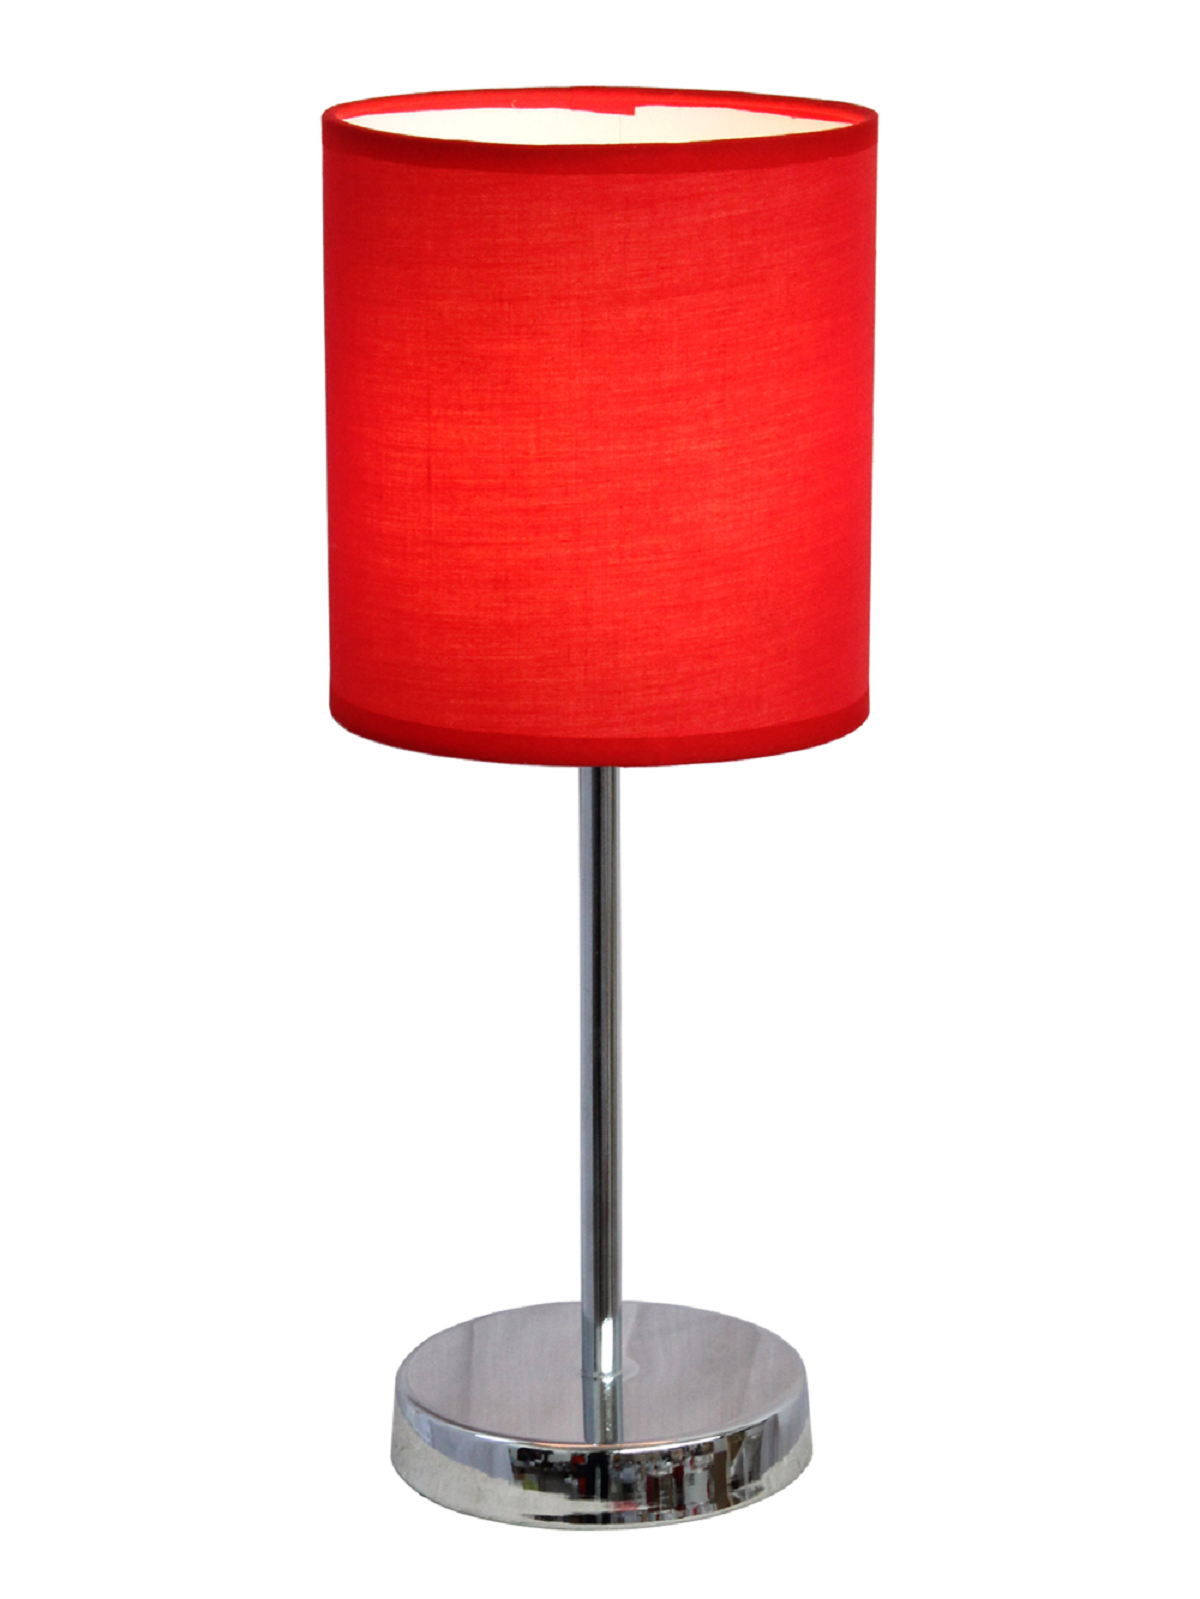 Simple Designs Chrome Basic Table Lamp with Red Shade